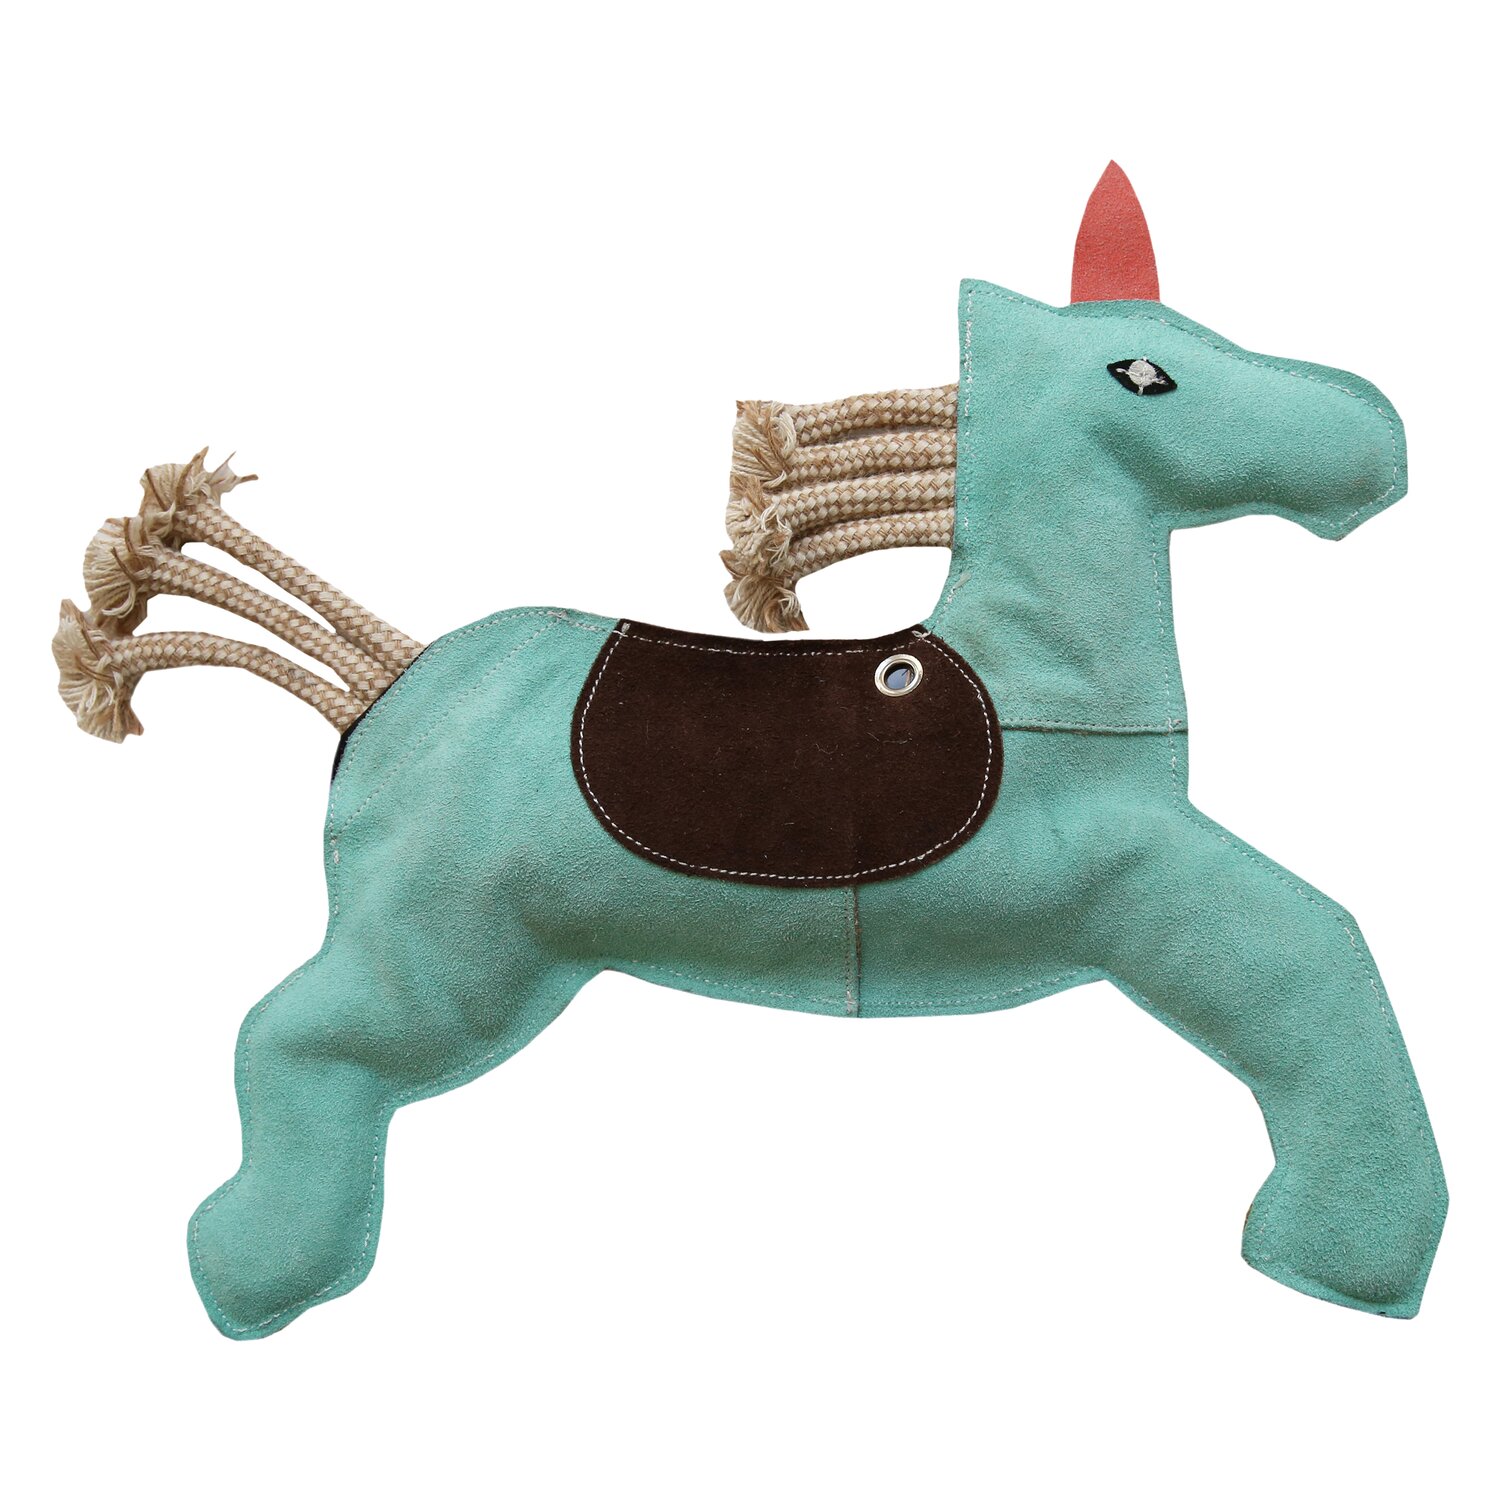 KENTUCKY Relax Horse Toy Unicorn colored